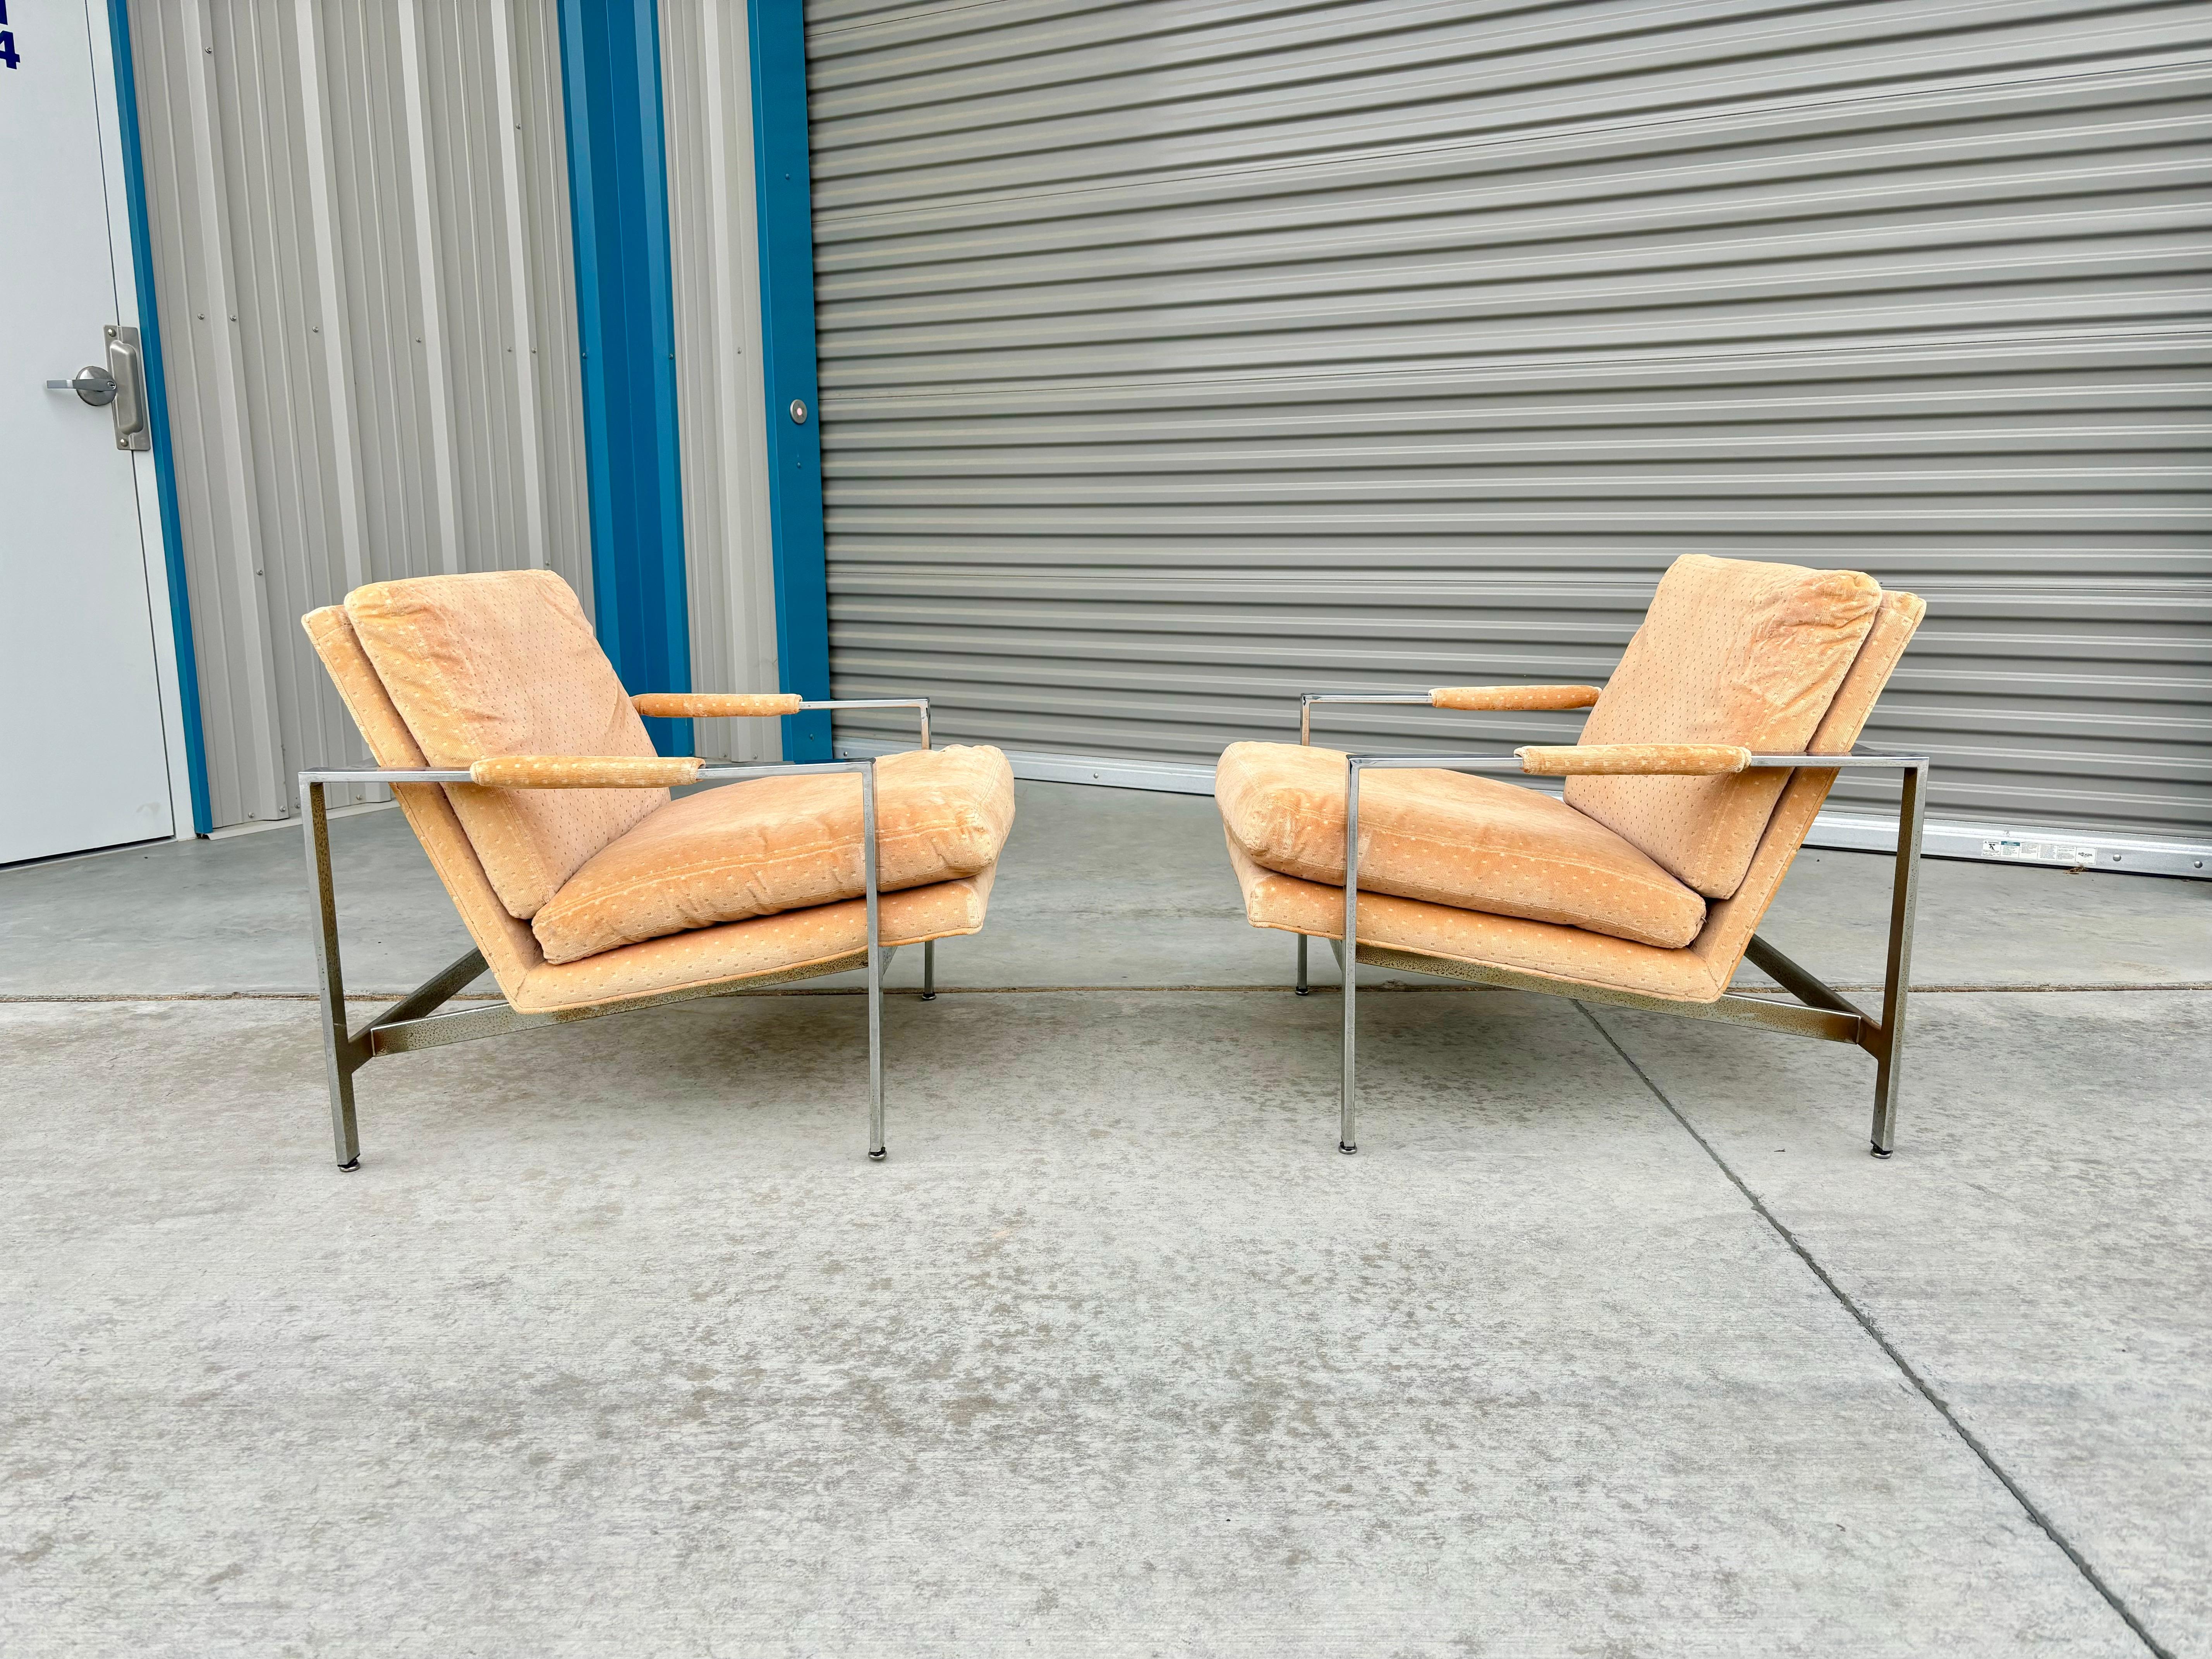 1970s Mid Century Chrome Lounge Chair by Milo Baughman for Thayer Coggin - Set o In Good Condition For Sale In North Hollywood, CA